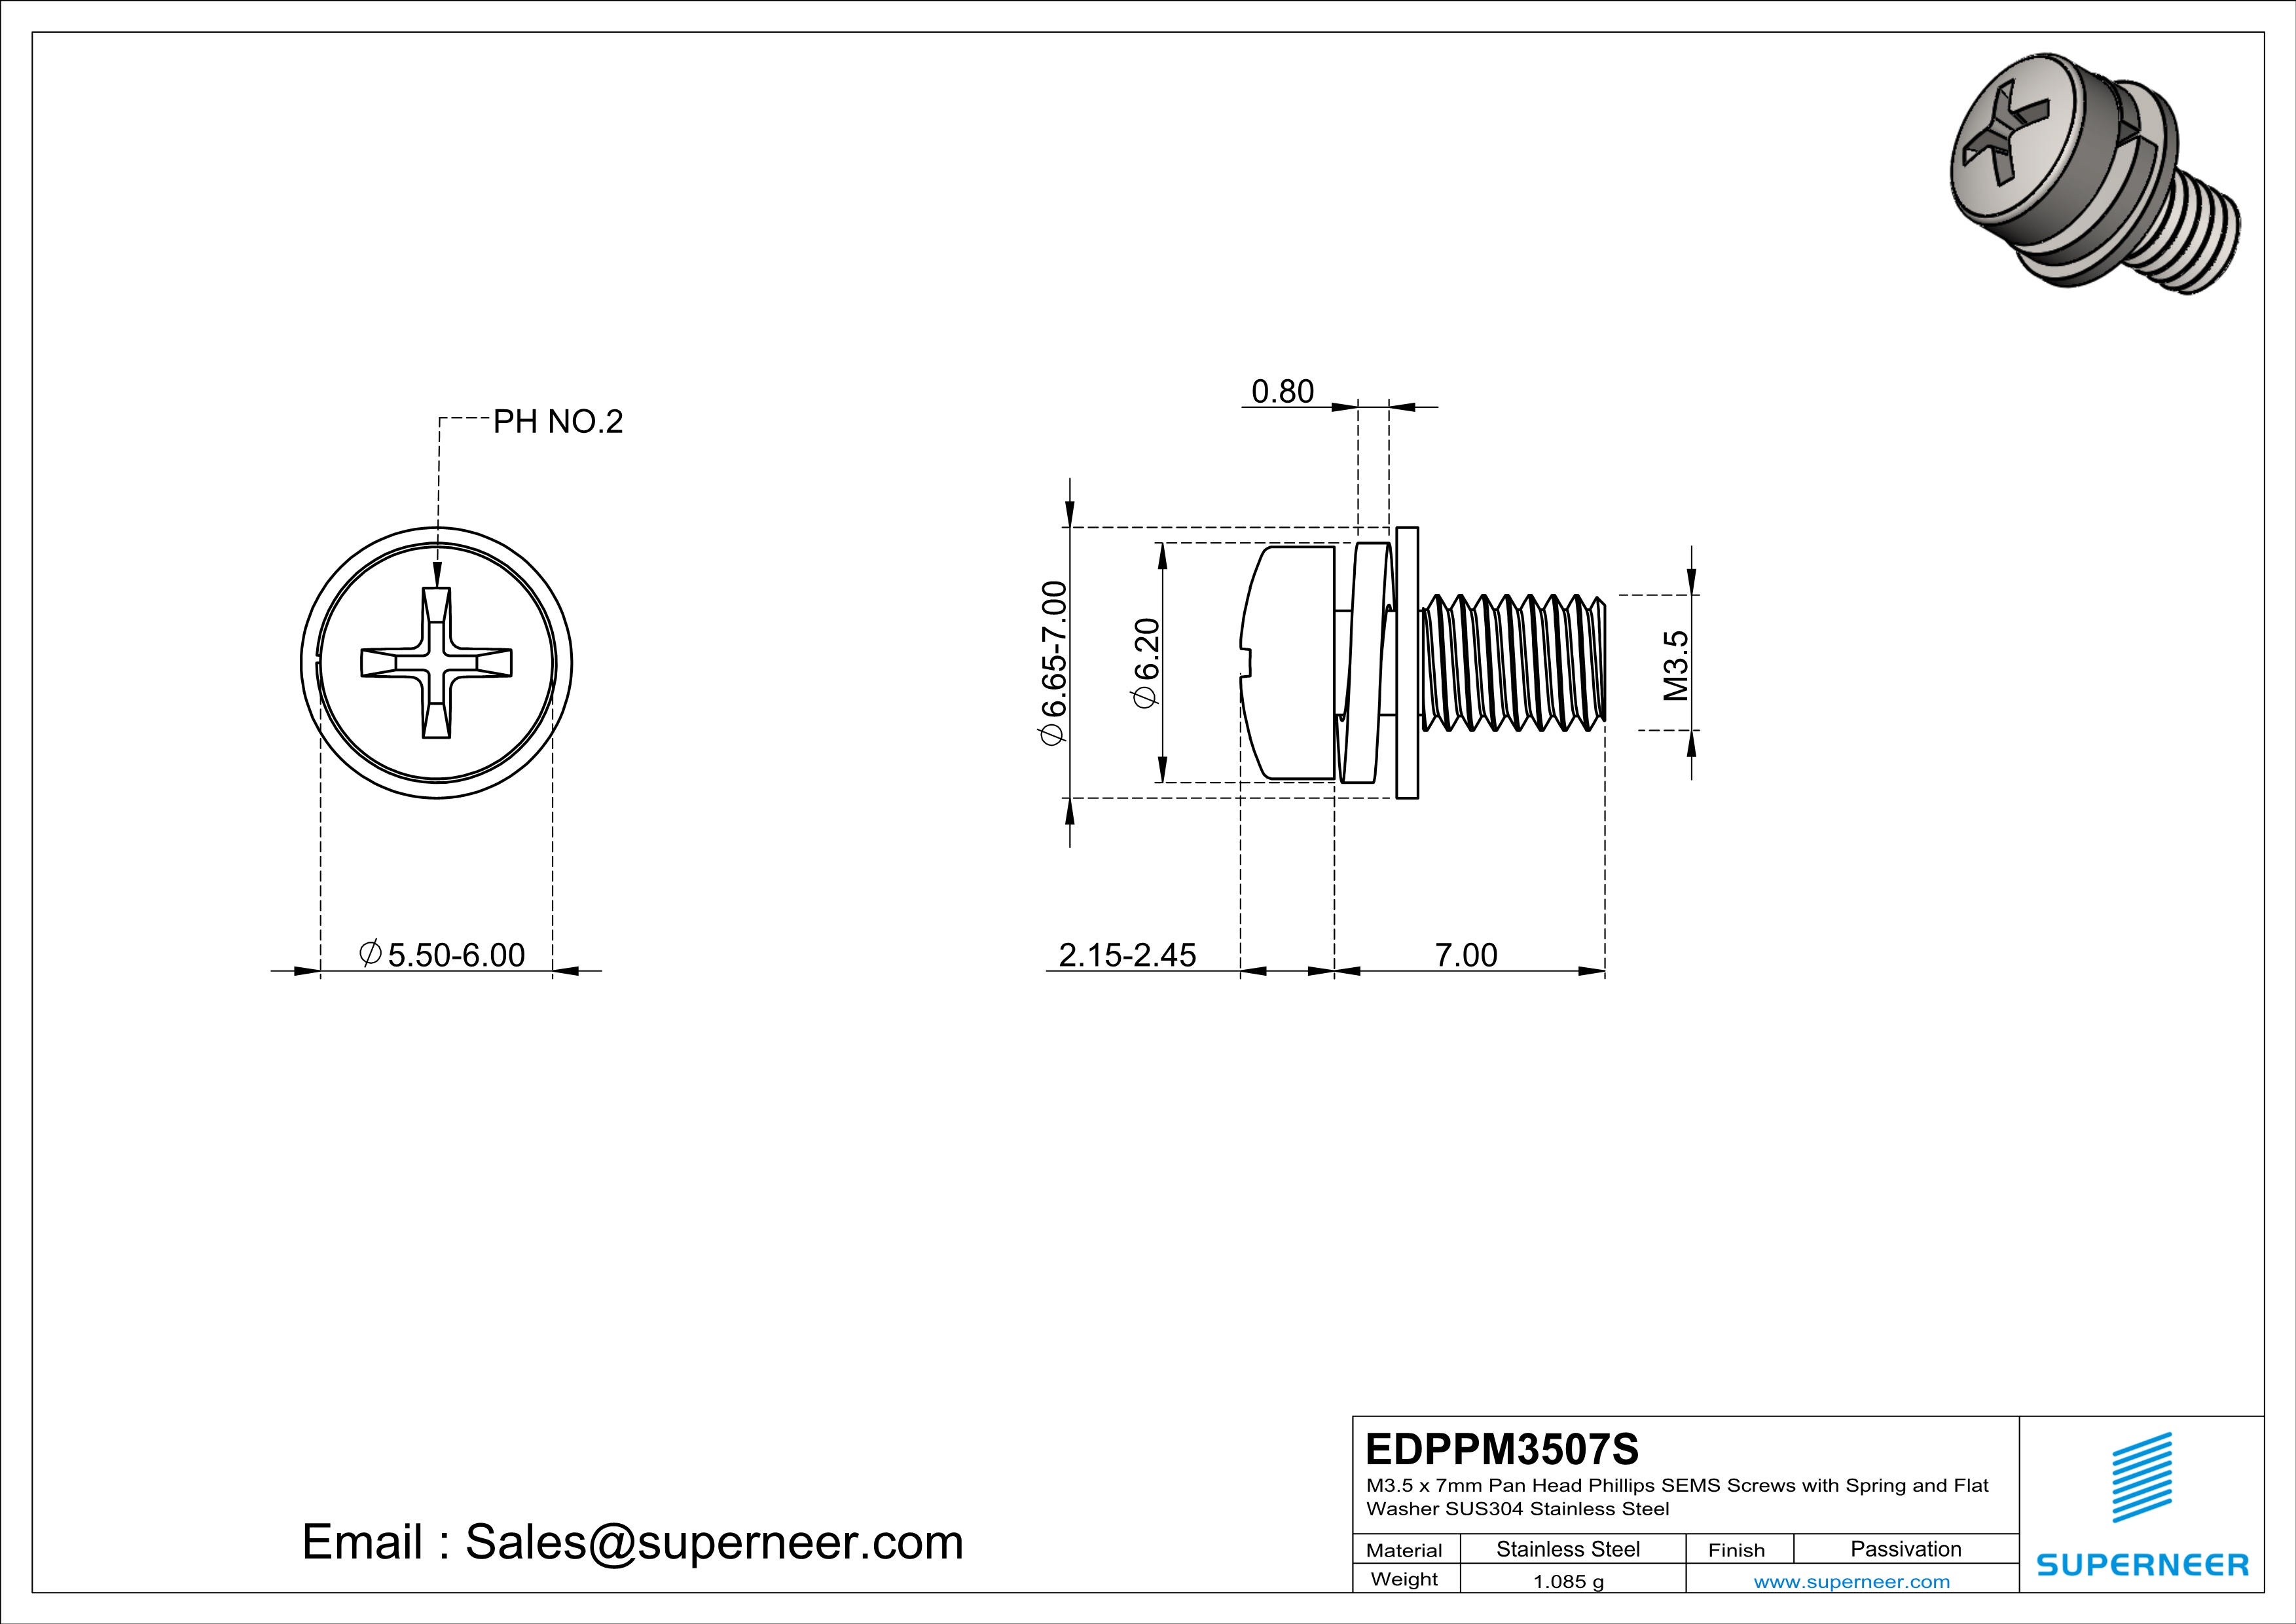 M3.5 x 7mm Pan Head Phillips SEMS Screws with Spring and Flat Washer SUS304 Stainless Steel Inox